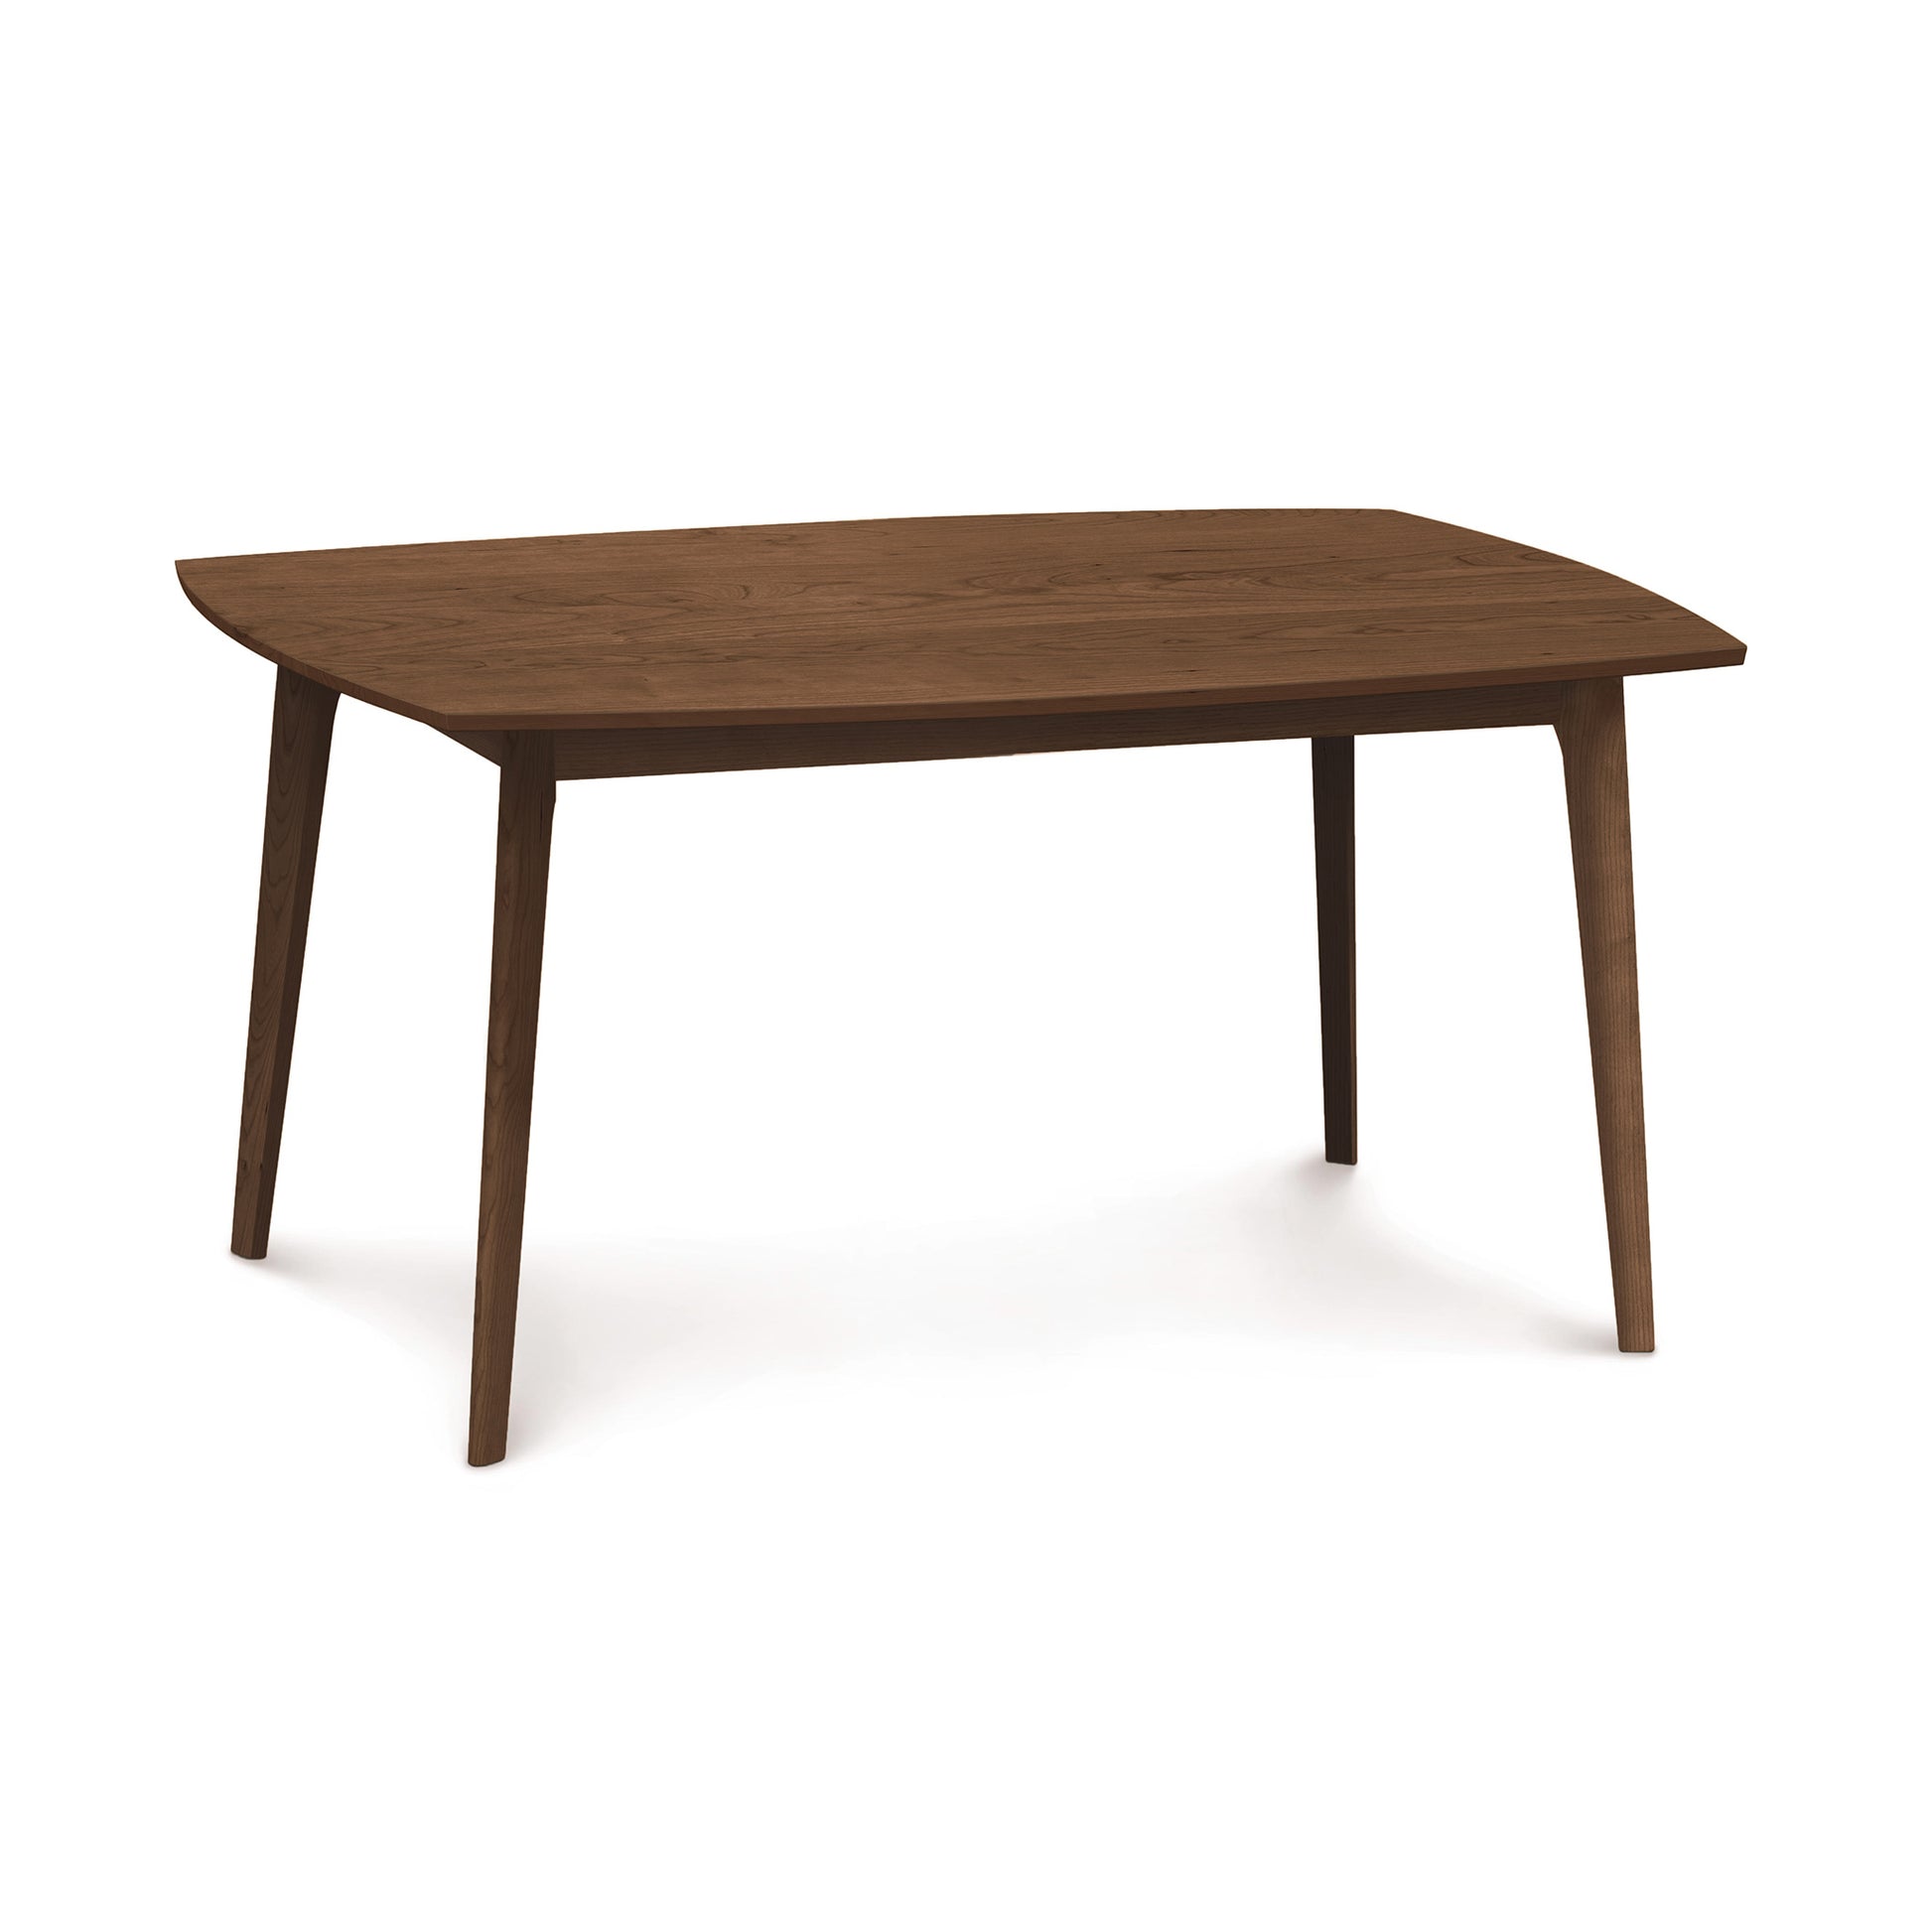 A Catalina Solid-Top Table with a rectangular top and angled legs on a white background, crafted from sustainably-sourced hardwoods by Copeland Furniture.